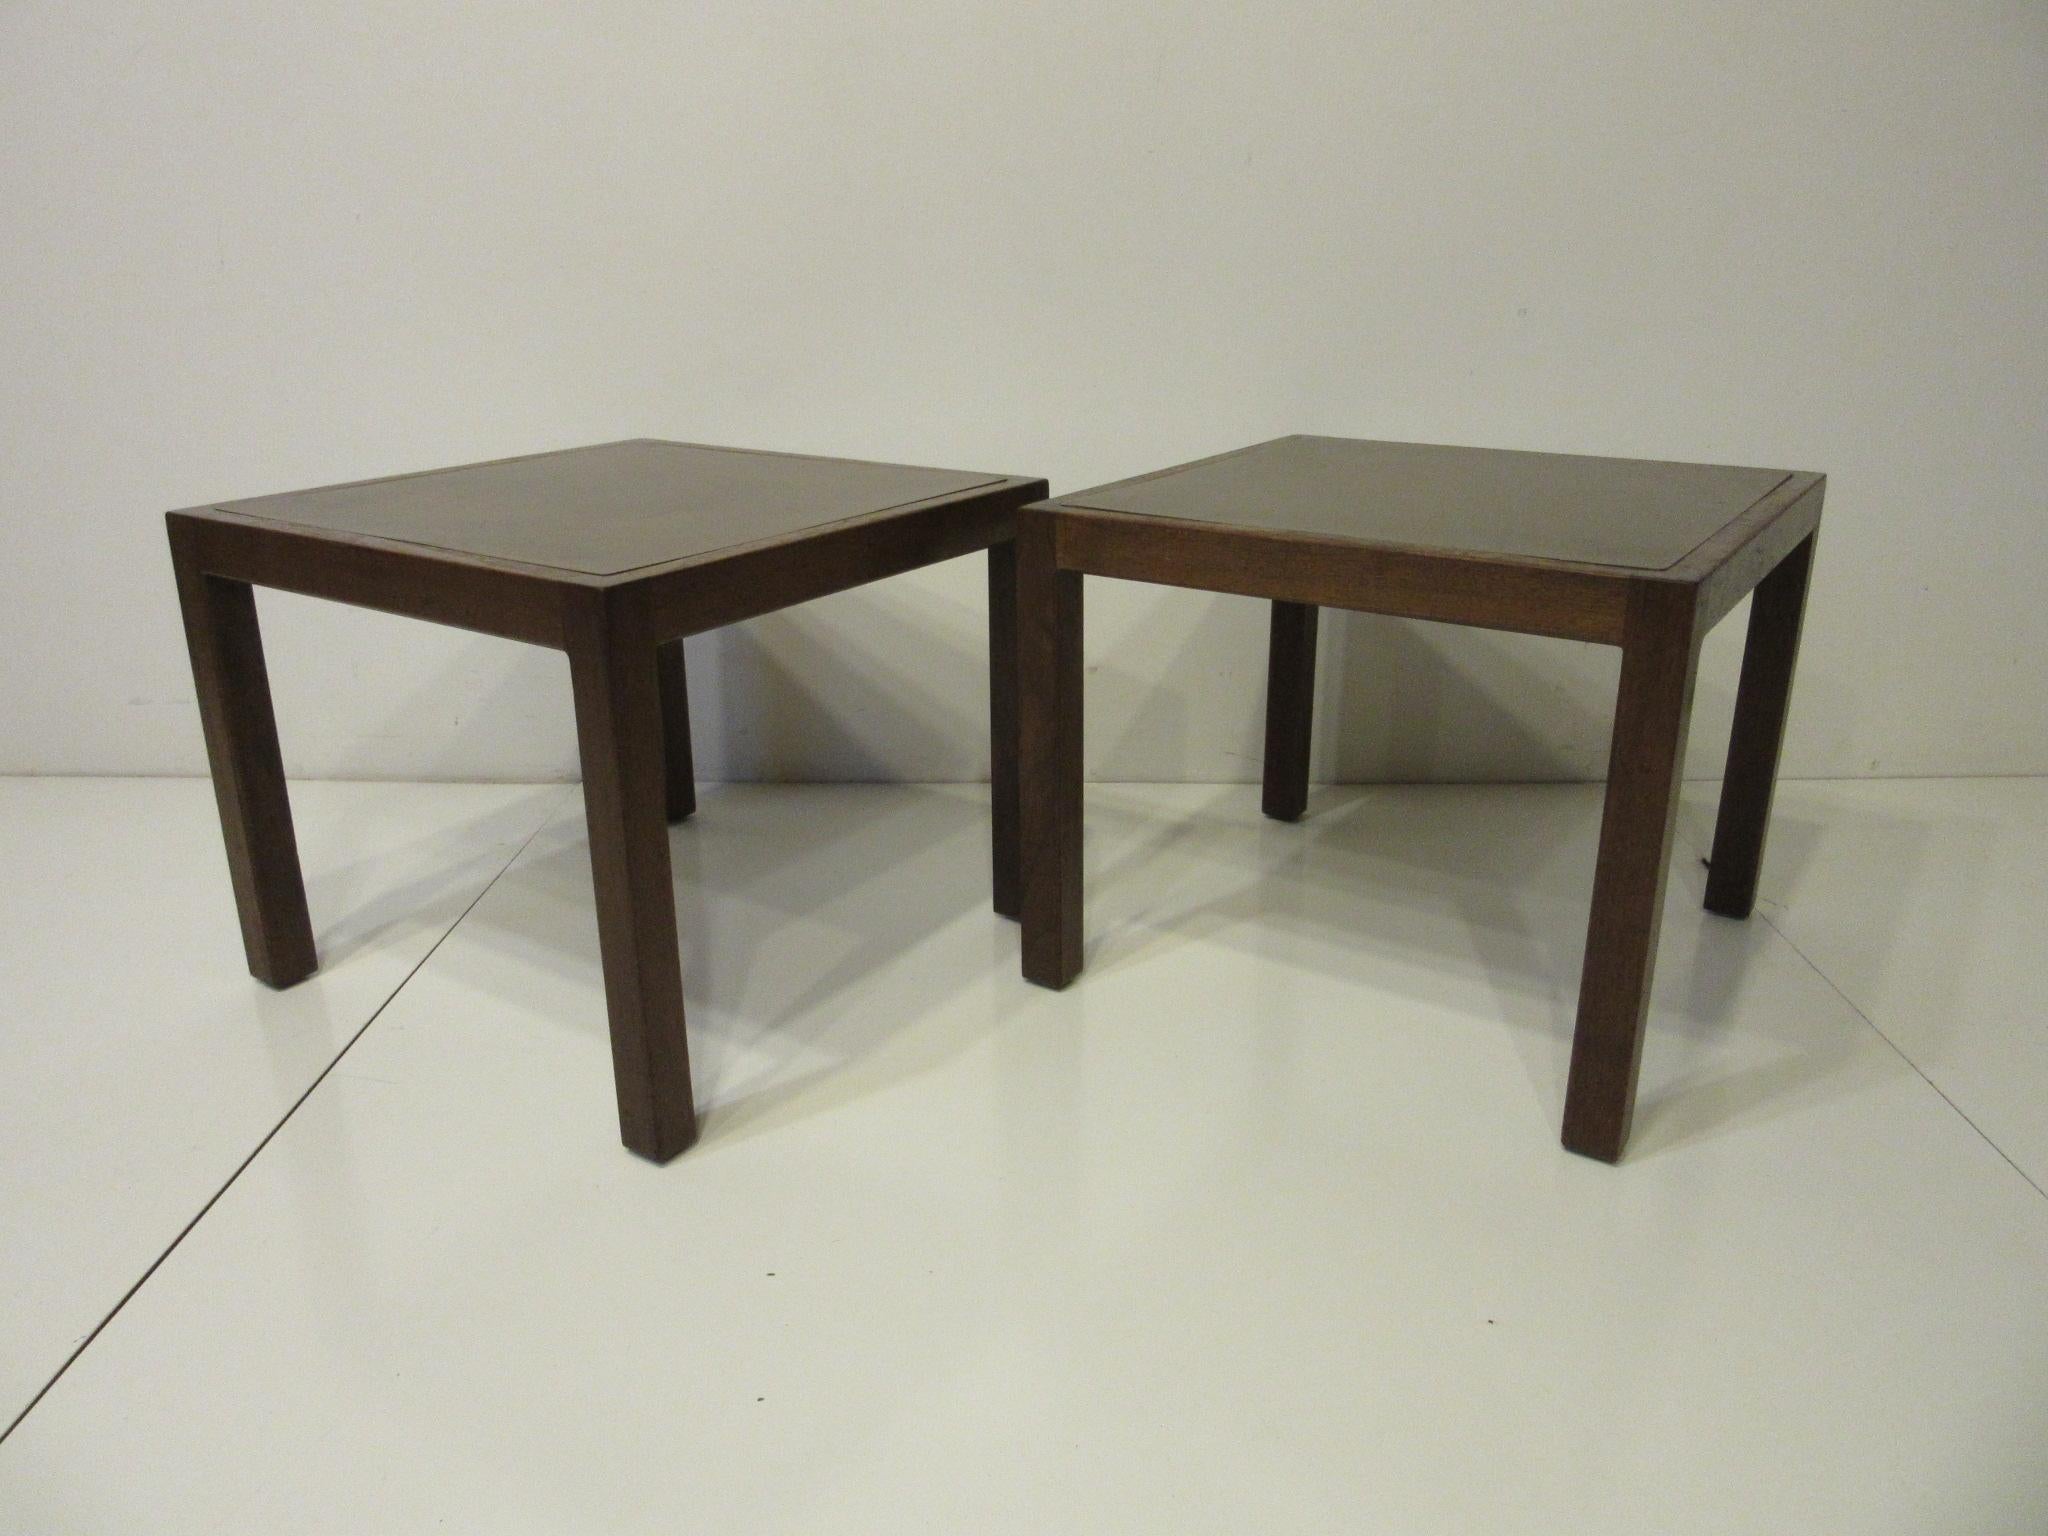 A parsons styled walnut framed set of side tables with veneer acid etched brass and clear coated  inserted tops . Simple and well crafted locally known in the Seattle area as Northwest Contemporary they till retain the original manufactured labels